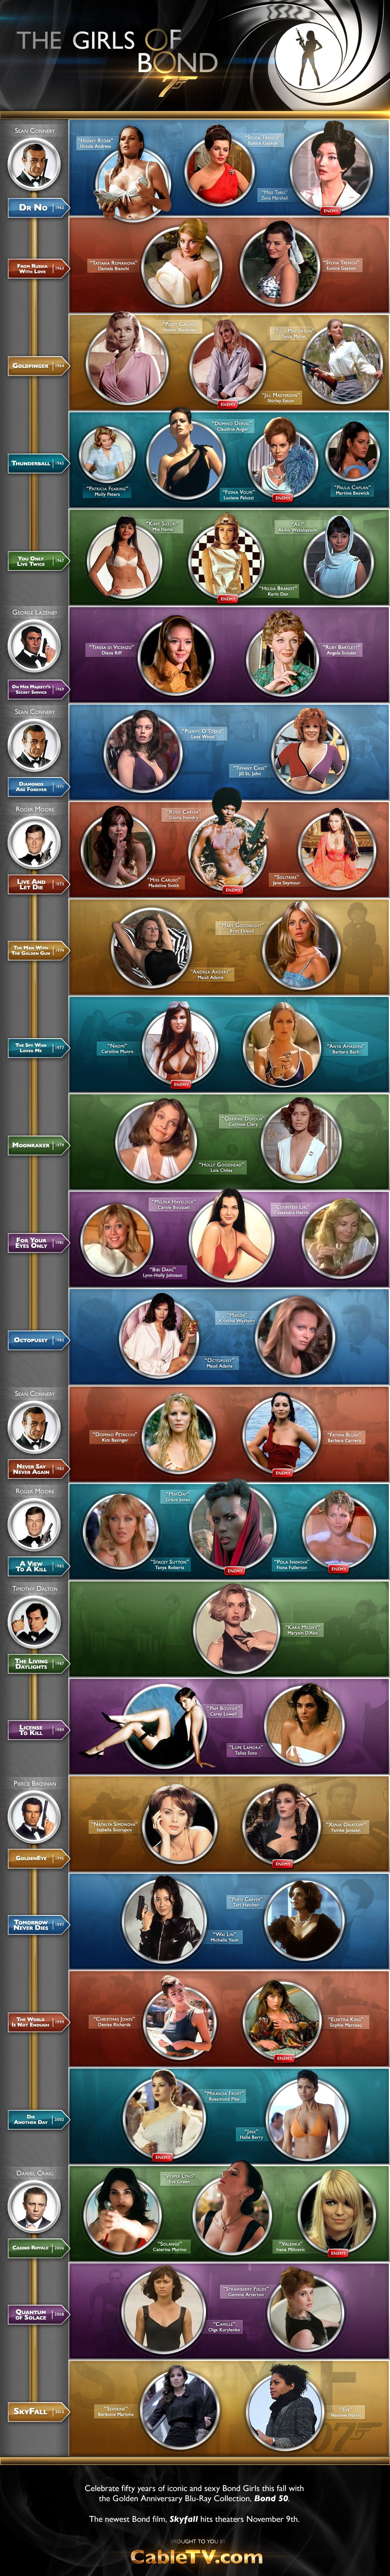 The-Girls-Of-Bond-infographic